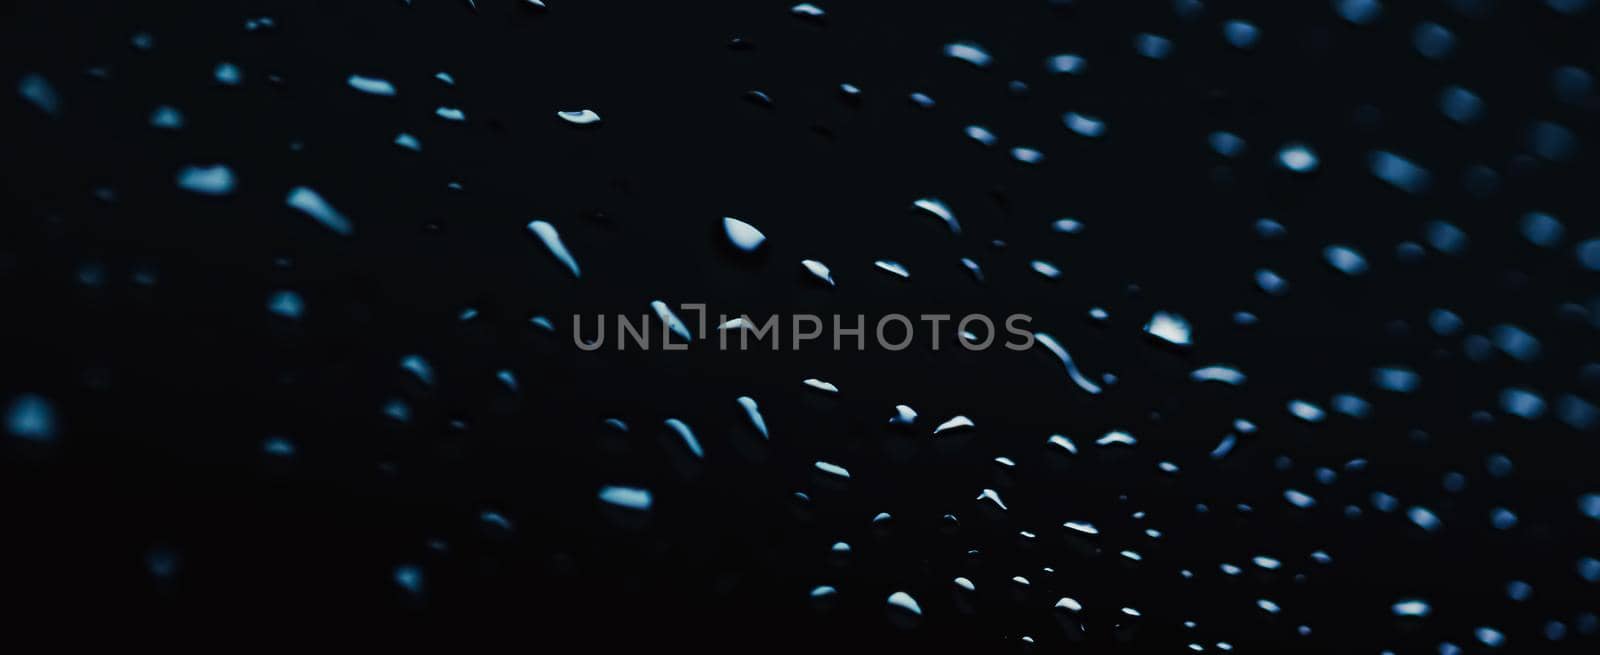 Liquid water drops on glass surface, abstract backdrop and science background concept